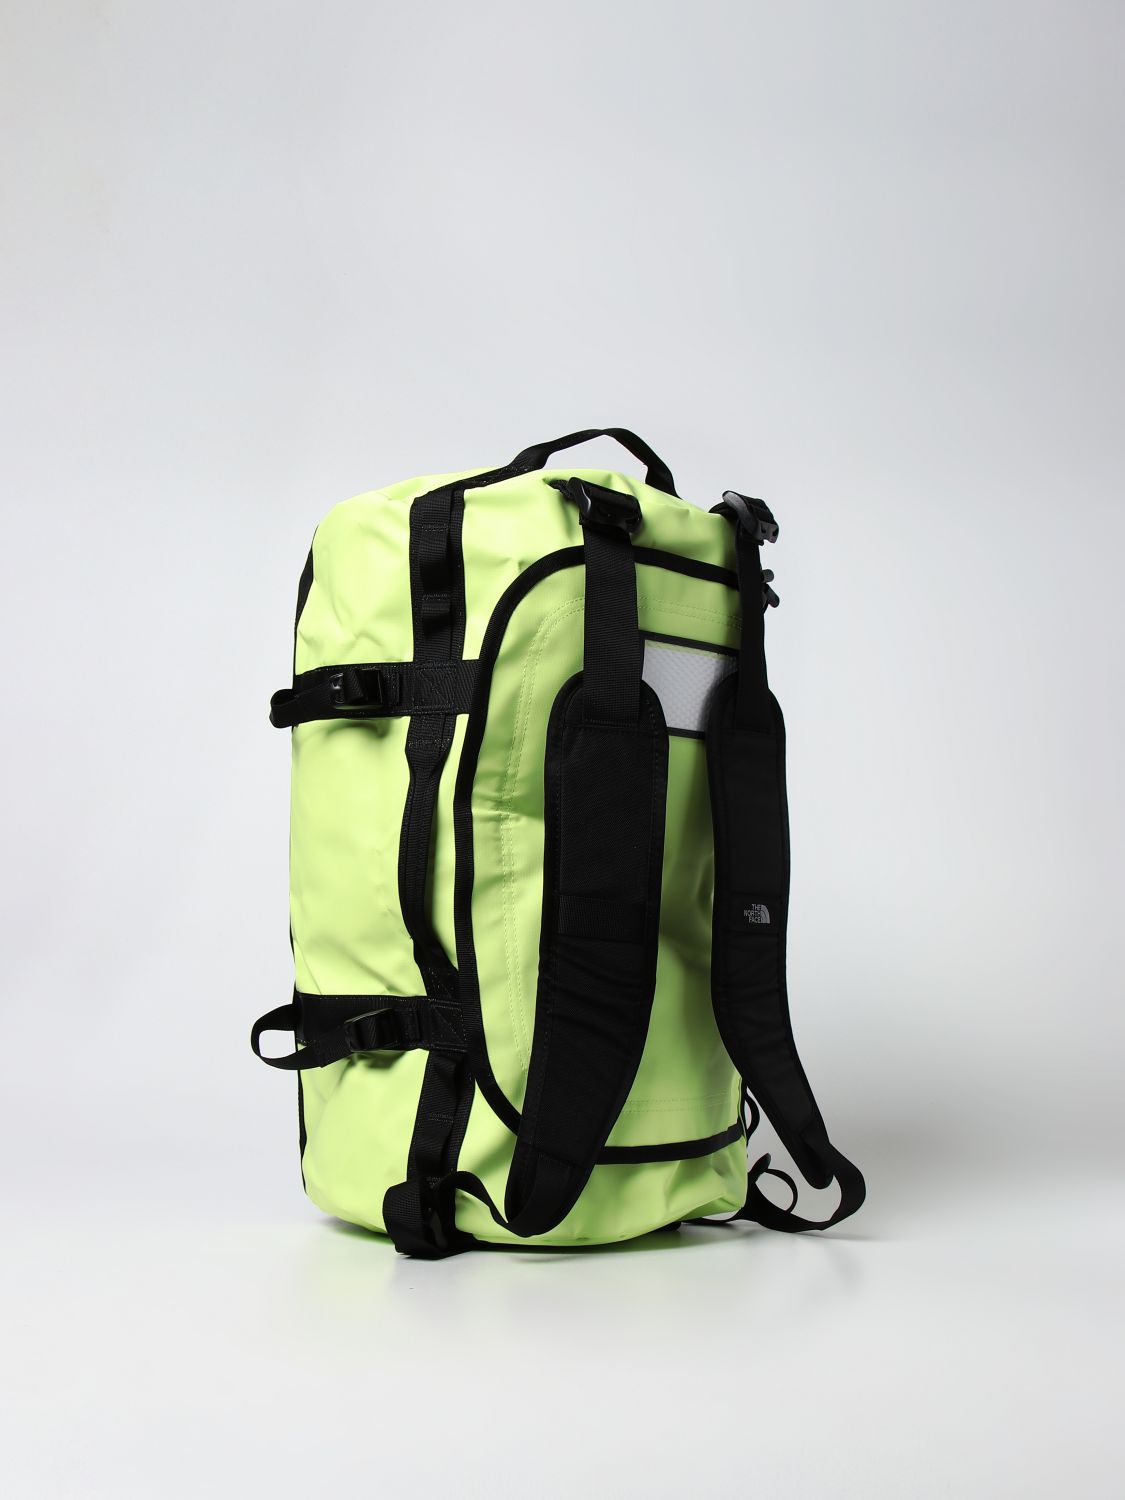 Sac à dos The North Face: Sac homme The North Face vert 2